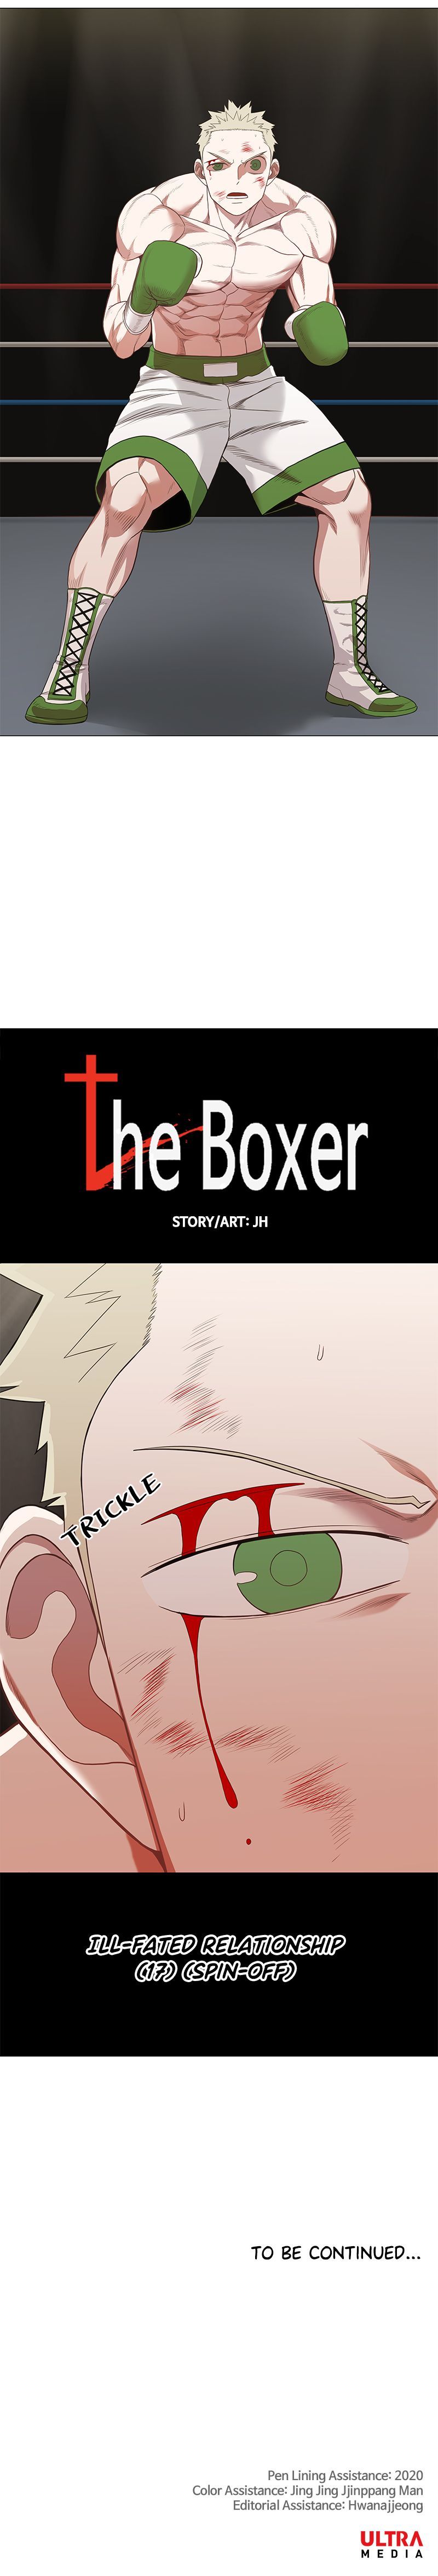 The Boxer 131 11